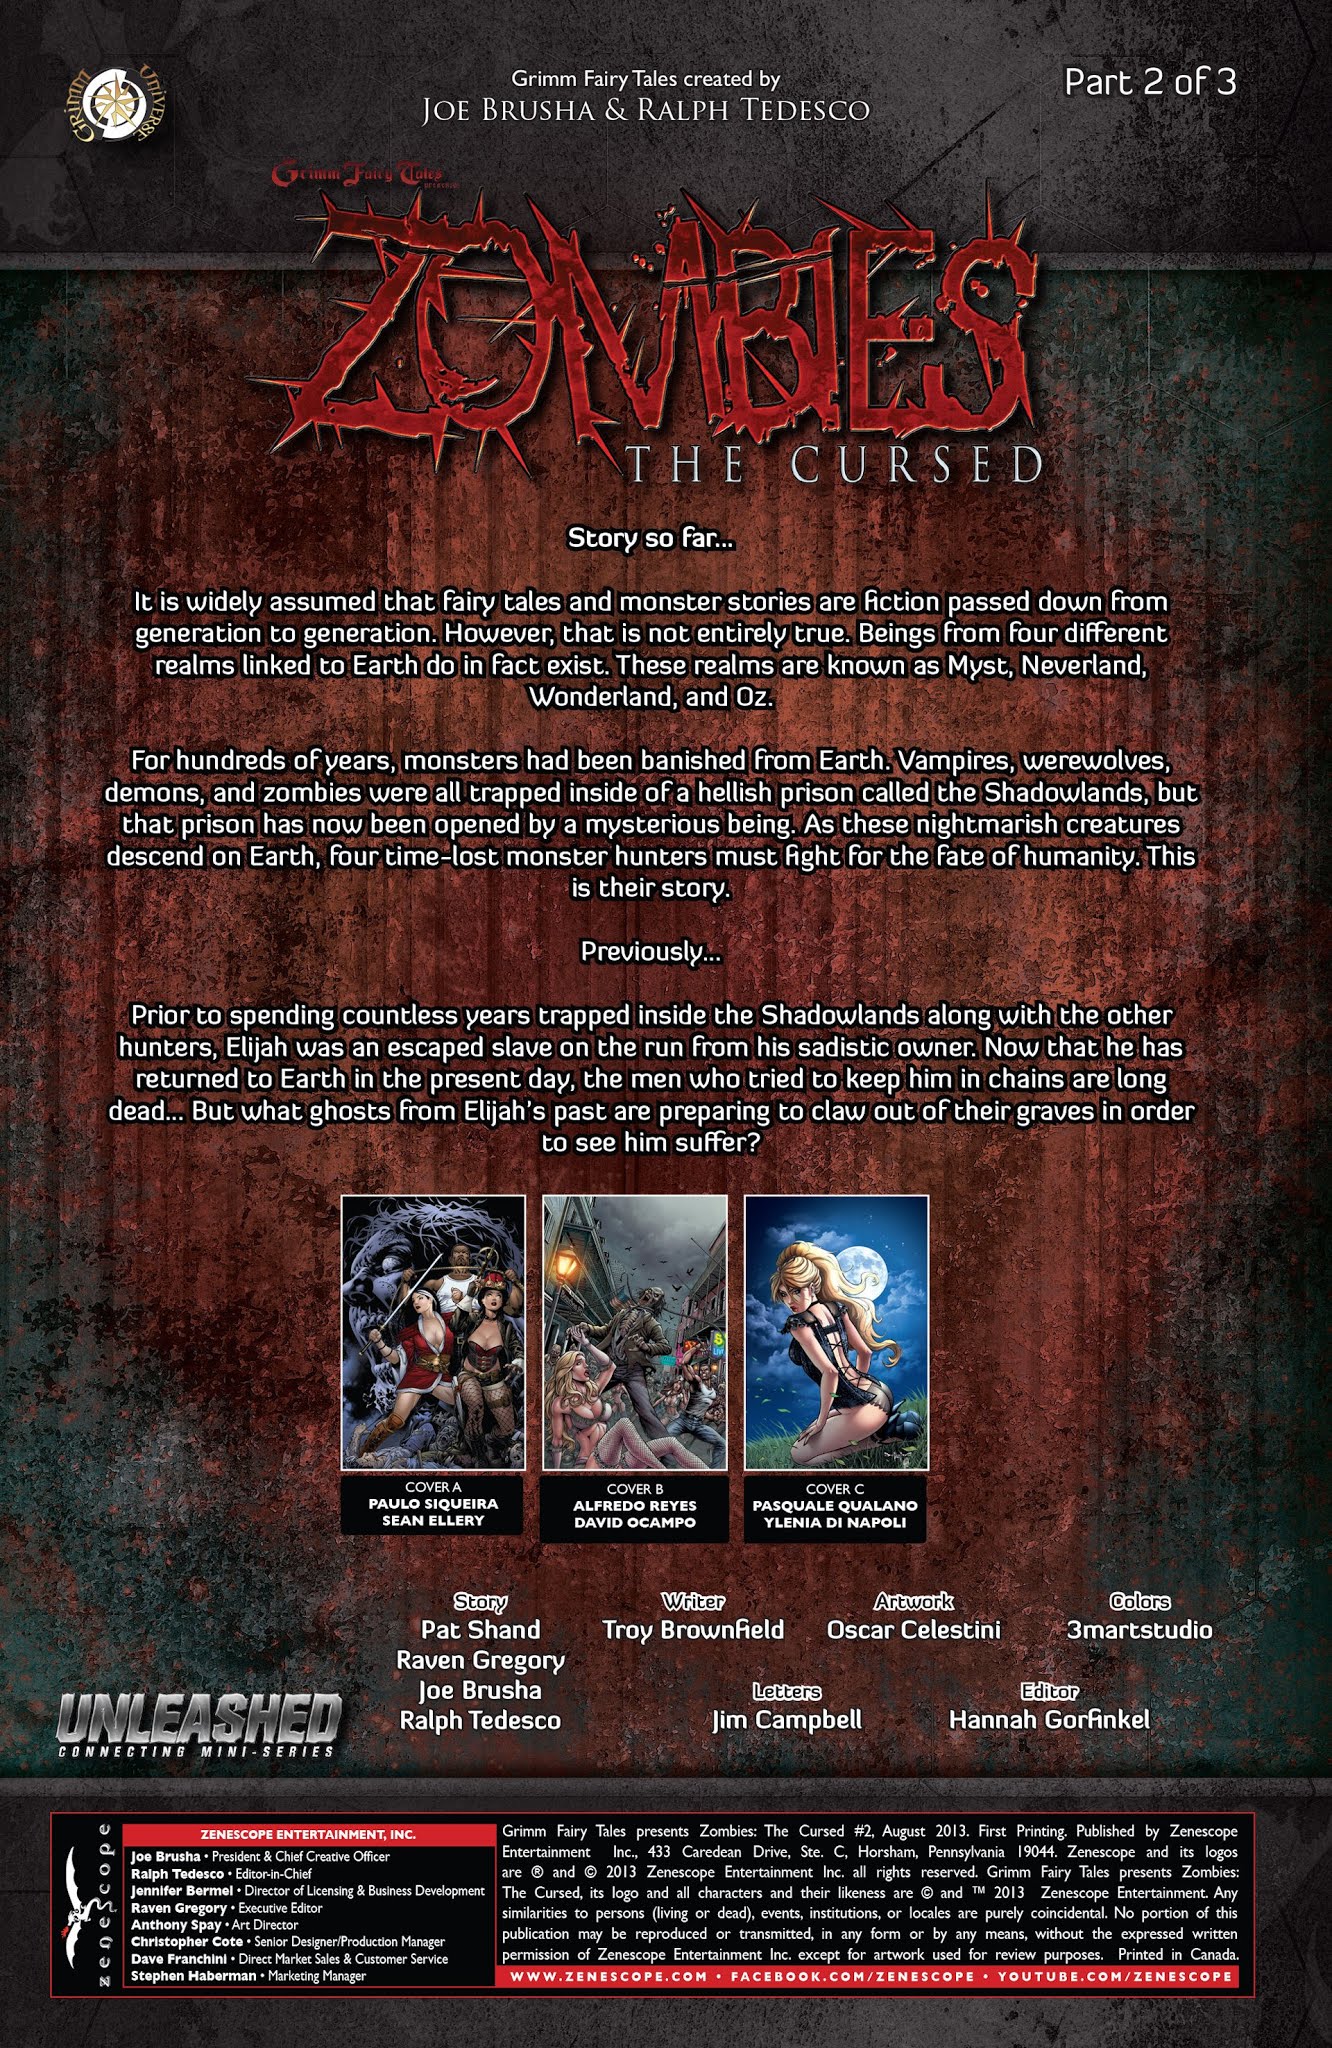 Read online Grimm Fairy Tales presents Zombies: The Cursed comic -  Issue #2 - 2